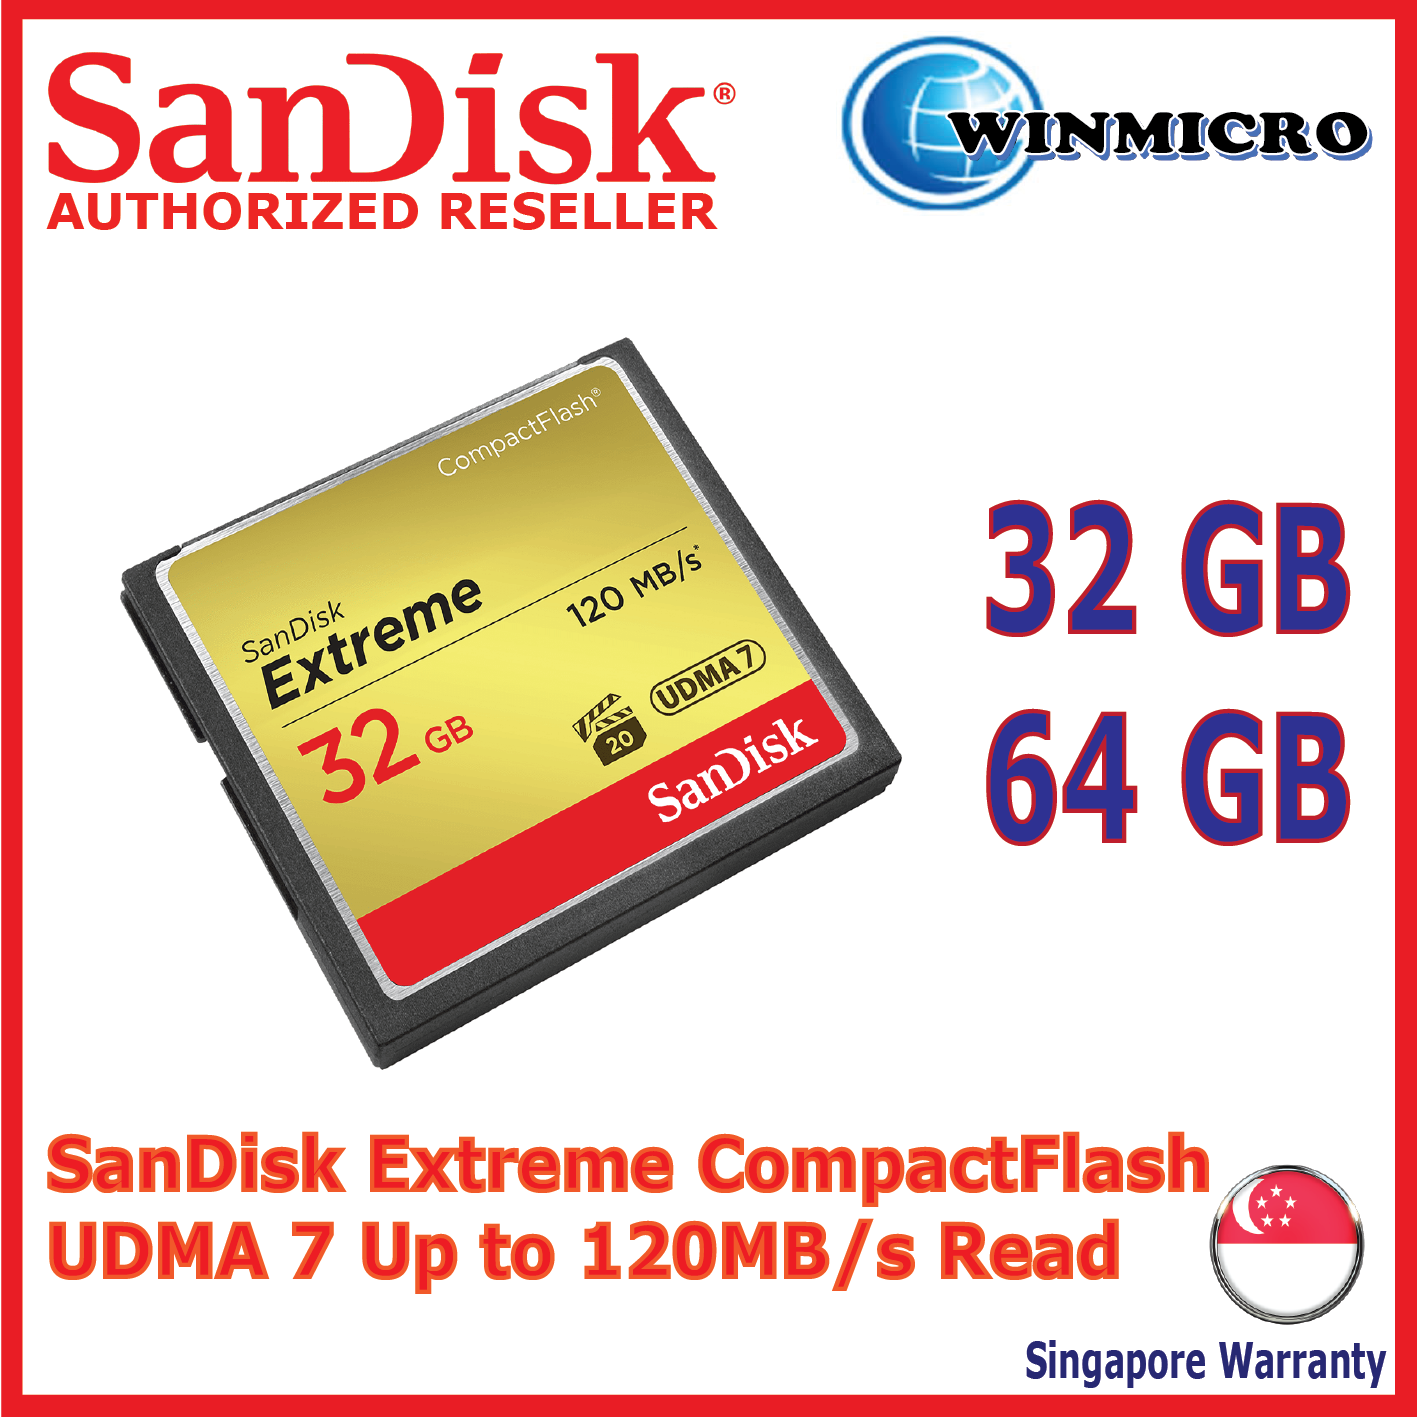 Sandisk 64gb Extreme CF Compact Flash Card 120mb/s Authorised Sandisk reseller 